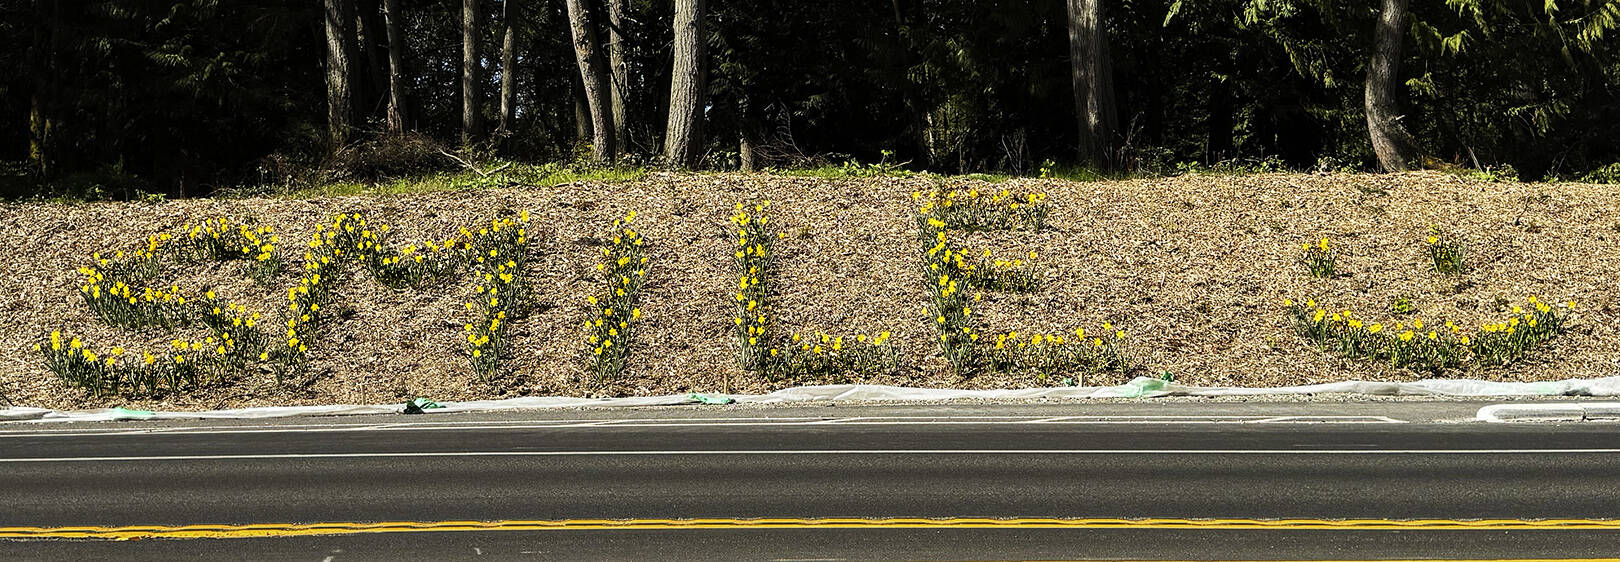 Nancy Treder courtesy photo
Spring daffodils spell out ‘smile’ near the intersection of Highway 305 and Sportsman Club Road. Planting the flowers by roads is a Bainbridge Island tradition started by Mary Sam, a healer and granddaughter of Suquamish’s Chief Sealth, for whom Seattle was named.